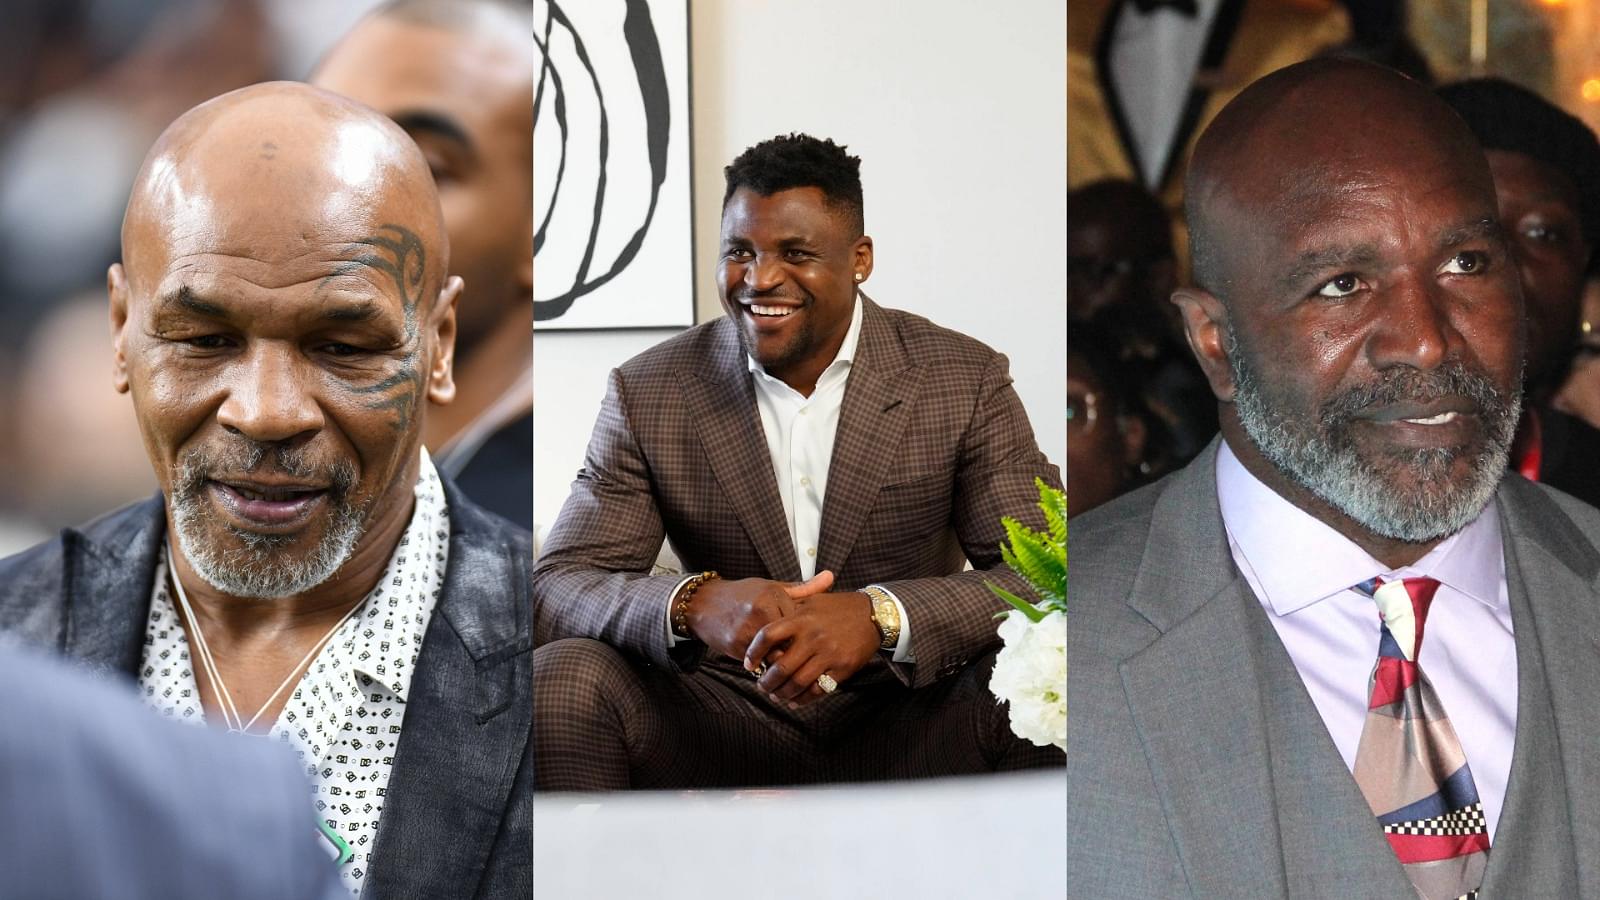 “I Love You”: Mike Tyson Ends 27-Year-Old Rivalry With Evander Holyfield, Francis Ngannou Reacts